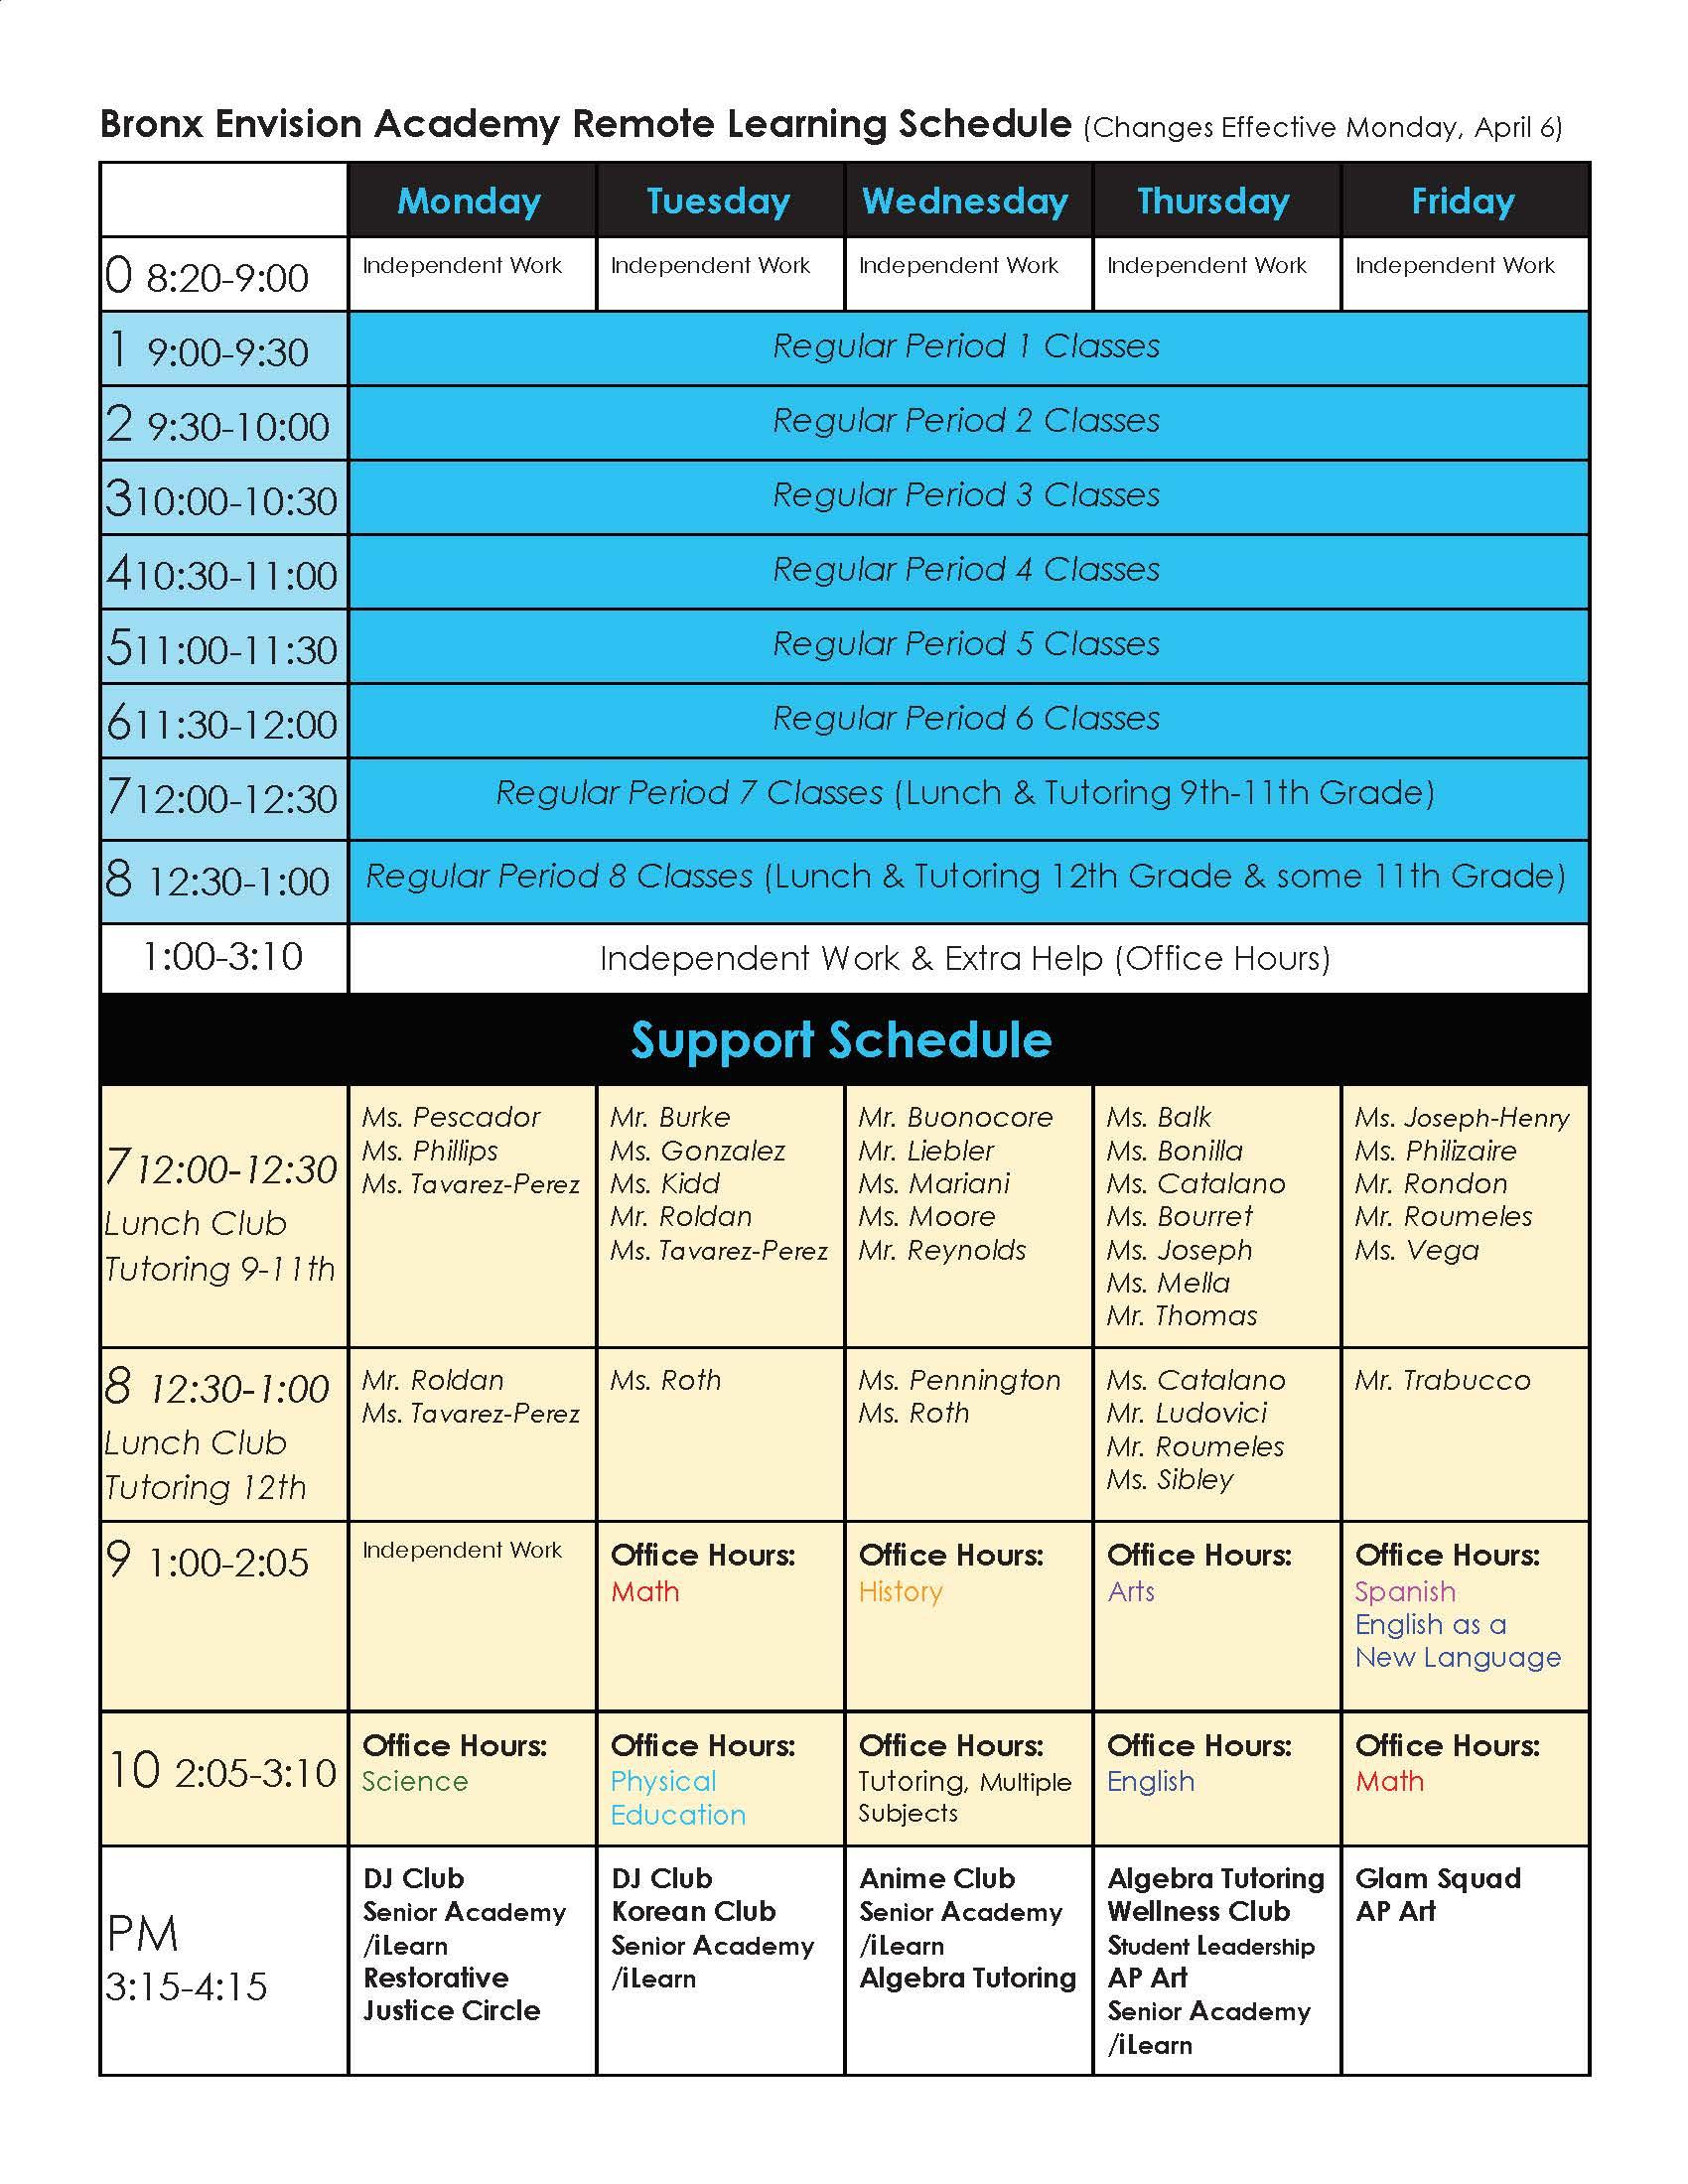 Remote Learning Schedule (Effective April 6)